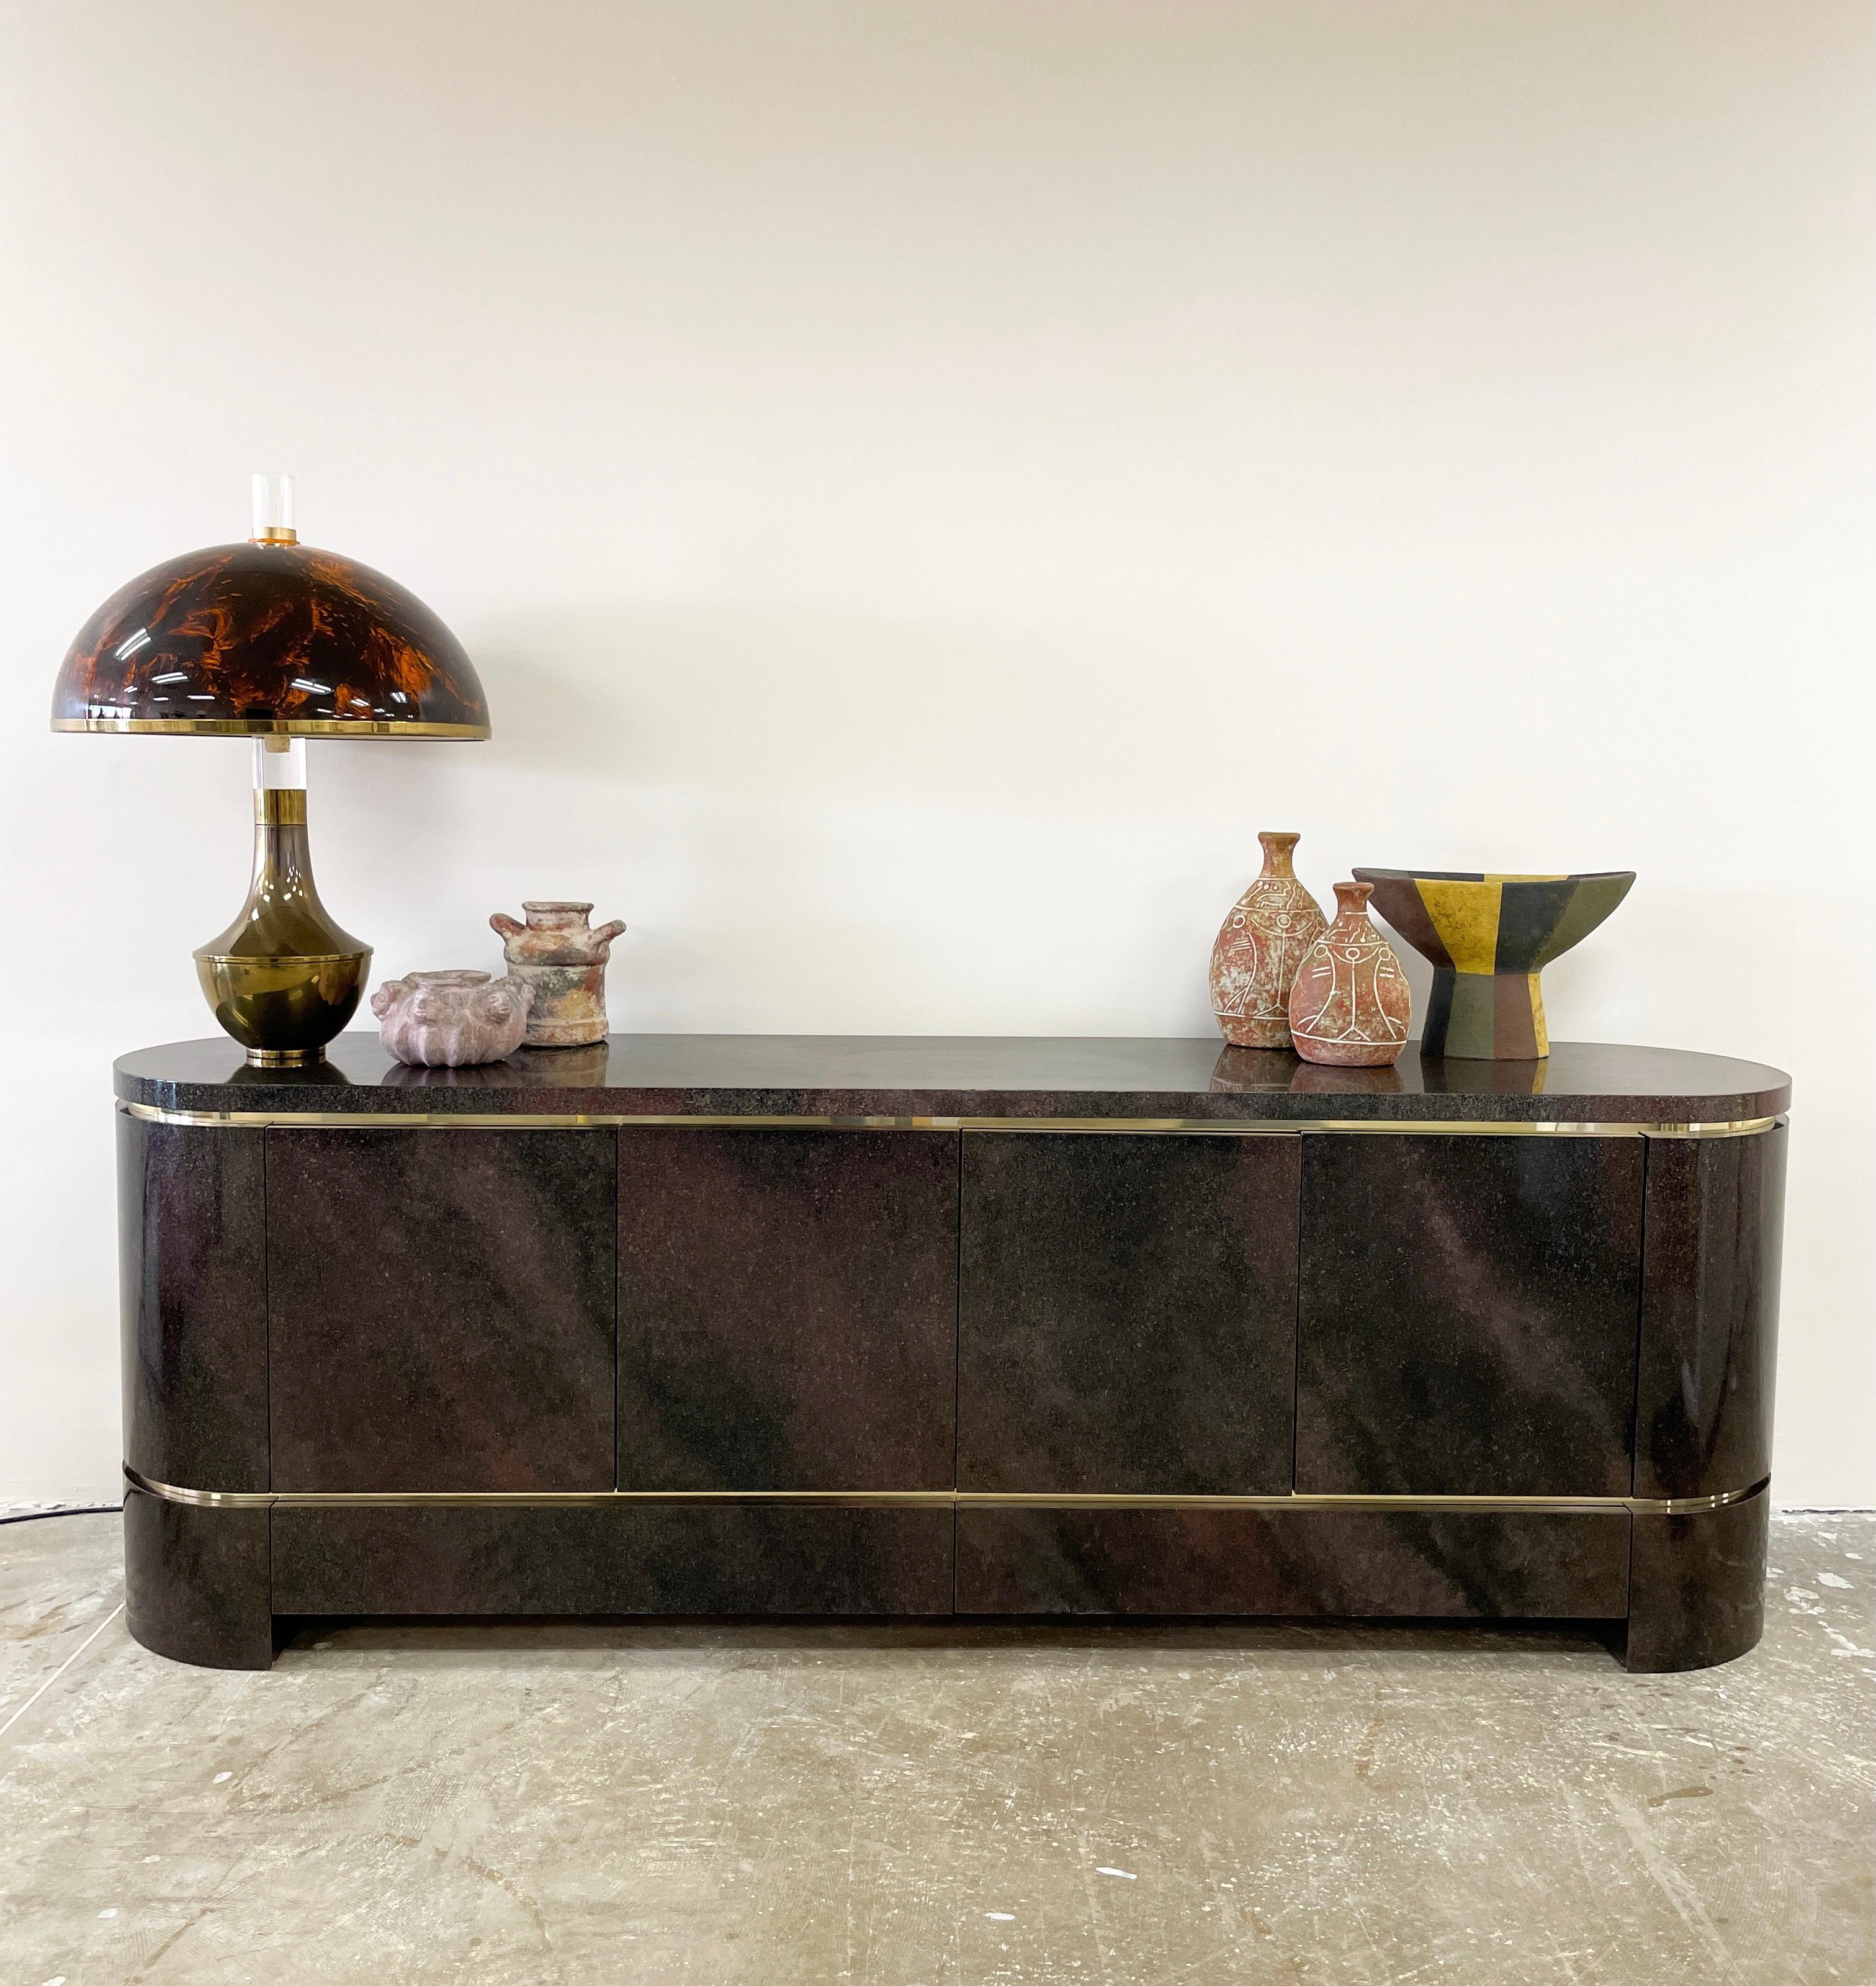 Vintage 70's Lacquered & Brass Sideboard/Credenza by Aldo Tura for Leonardo.

Very rare! Stunning lacquered chocolate brown & black with a hint of gold speckle.
It was custom-made for an estate. There are 1 upper drawer and 2 bottom drawers with a